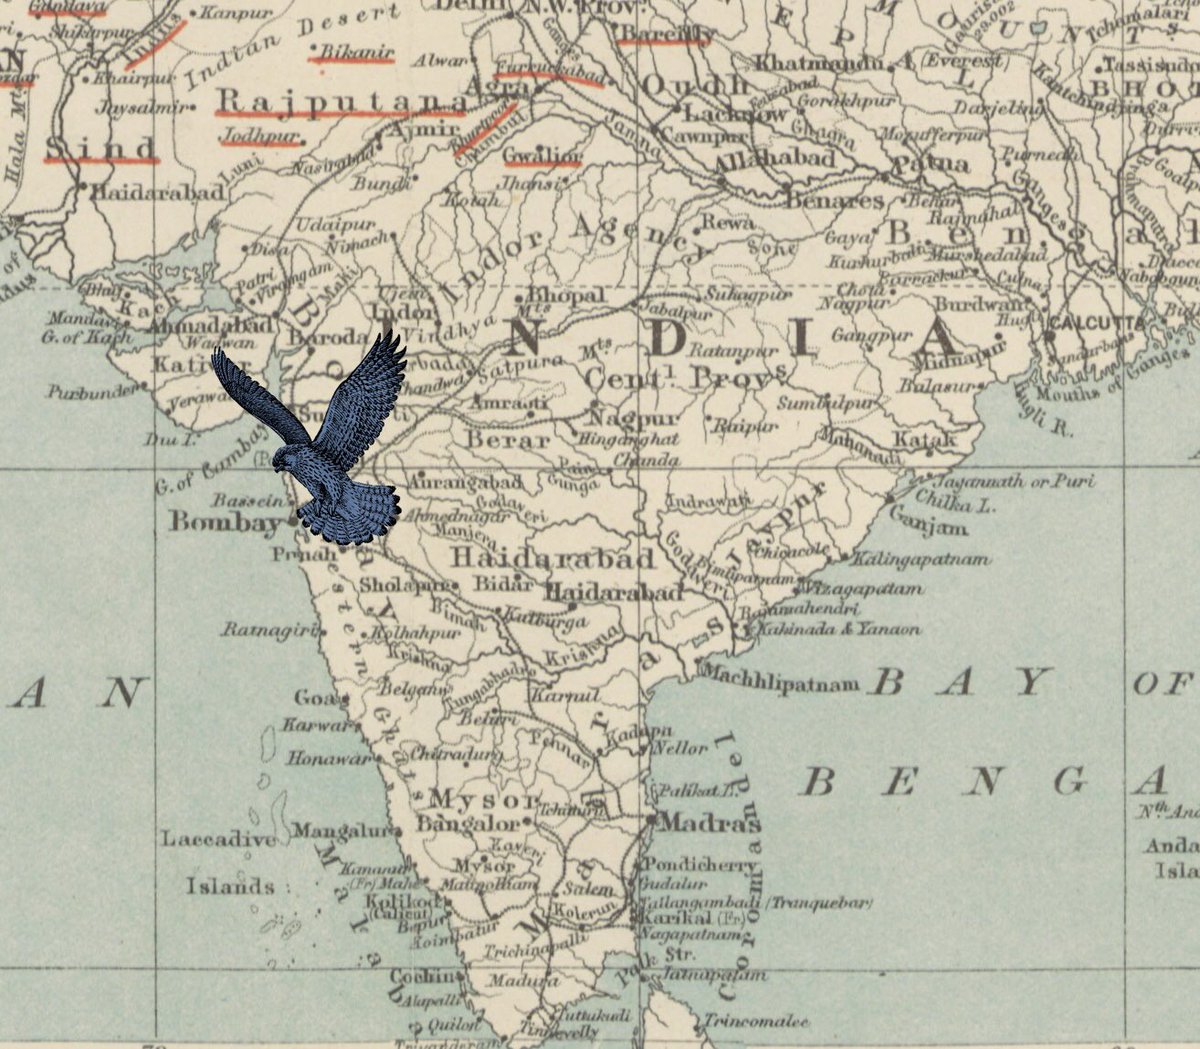 The word DOOLALLY, meaning ‘mad’ or ‘deranged’, derives from the town of Deolali in western India. The town was once home to a British army transit camp, where conditions were so squalid that many servicemen went insane while awaiting transport home to England.